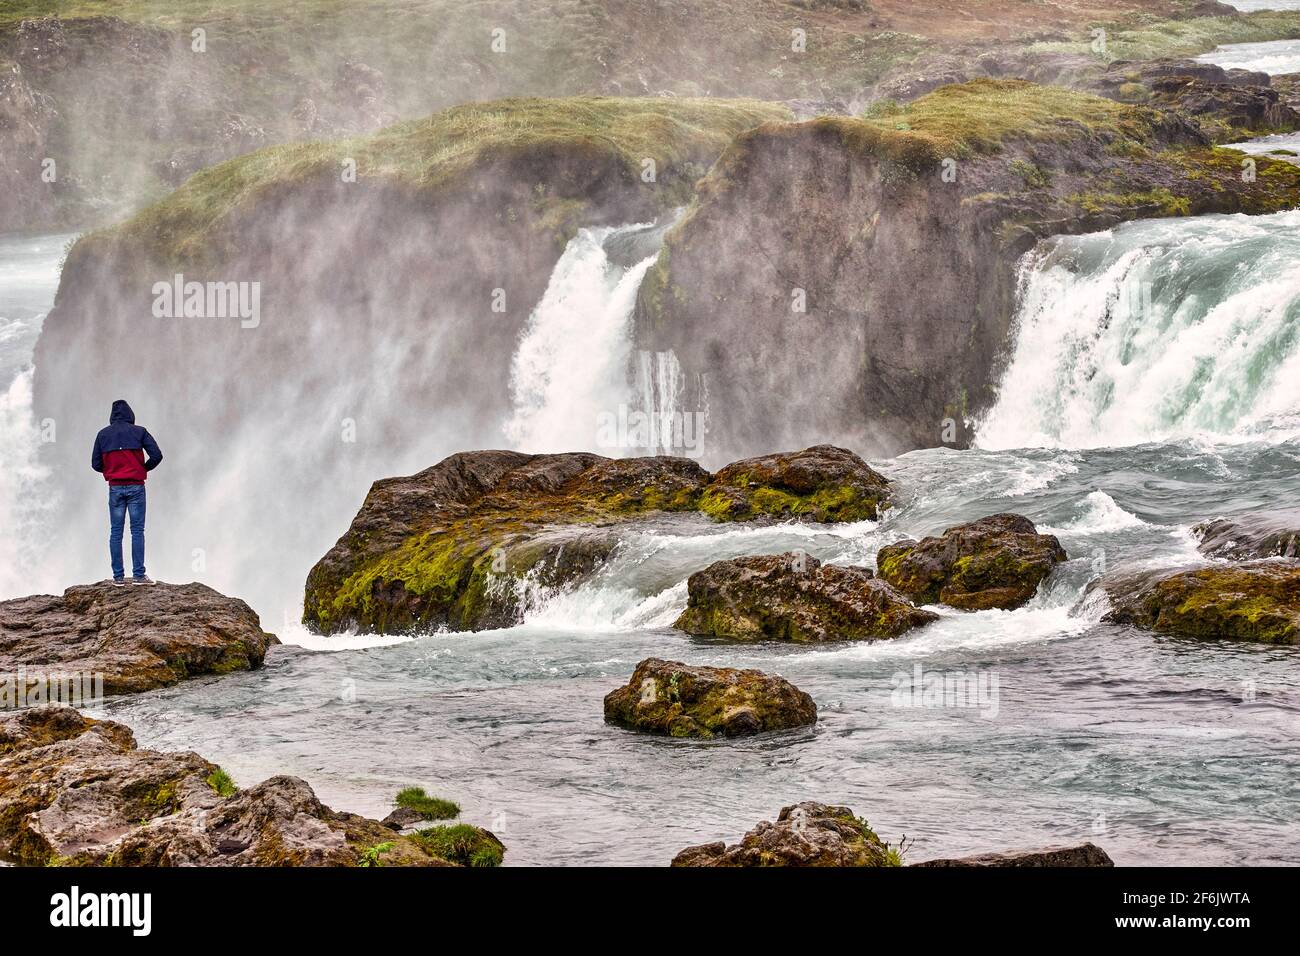 Goðafoss is a waterfall in northern Iceland. It is located along the country's main ring road at the junction with the Sprengisandur highland road. Stock Photo